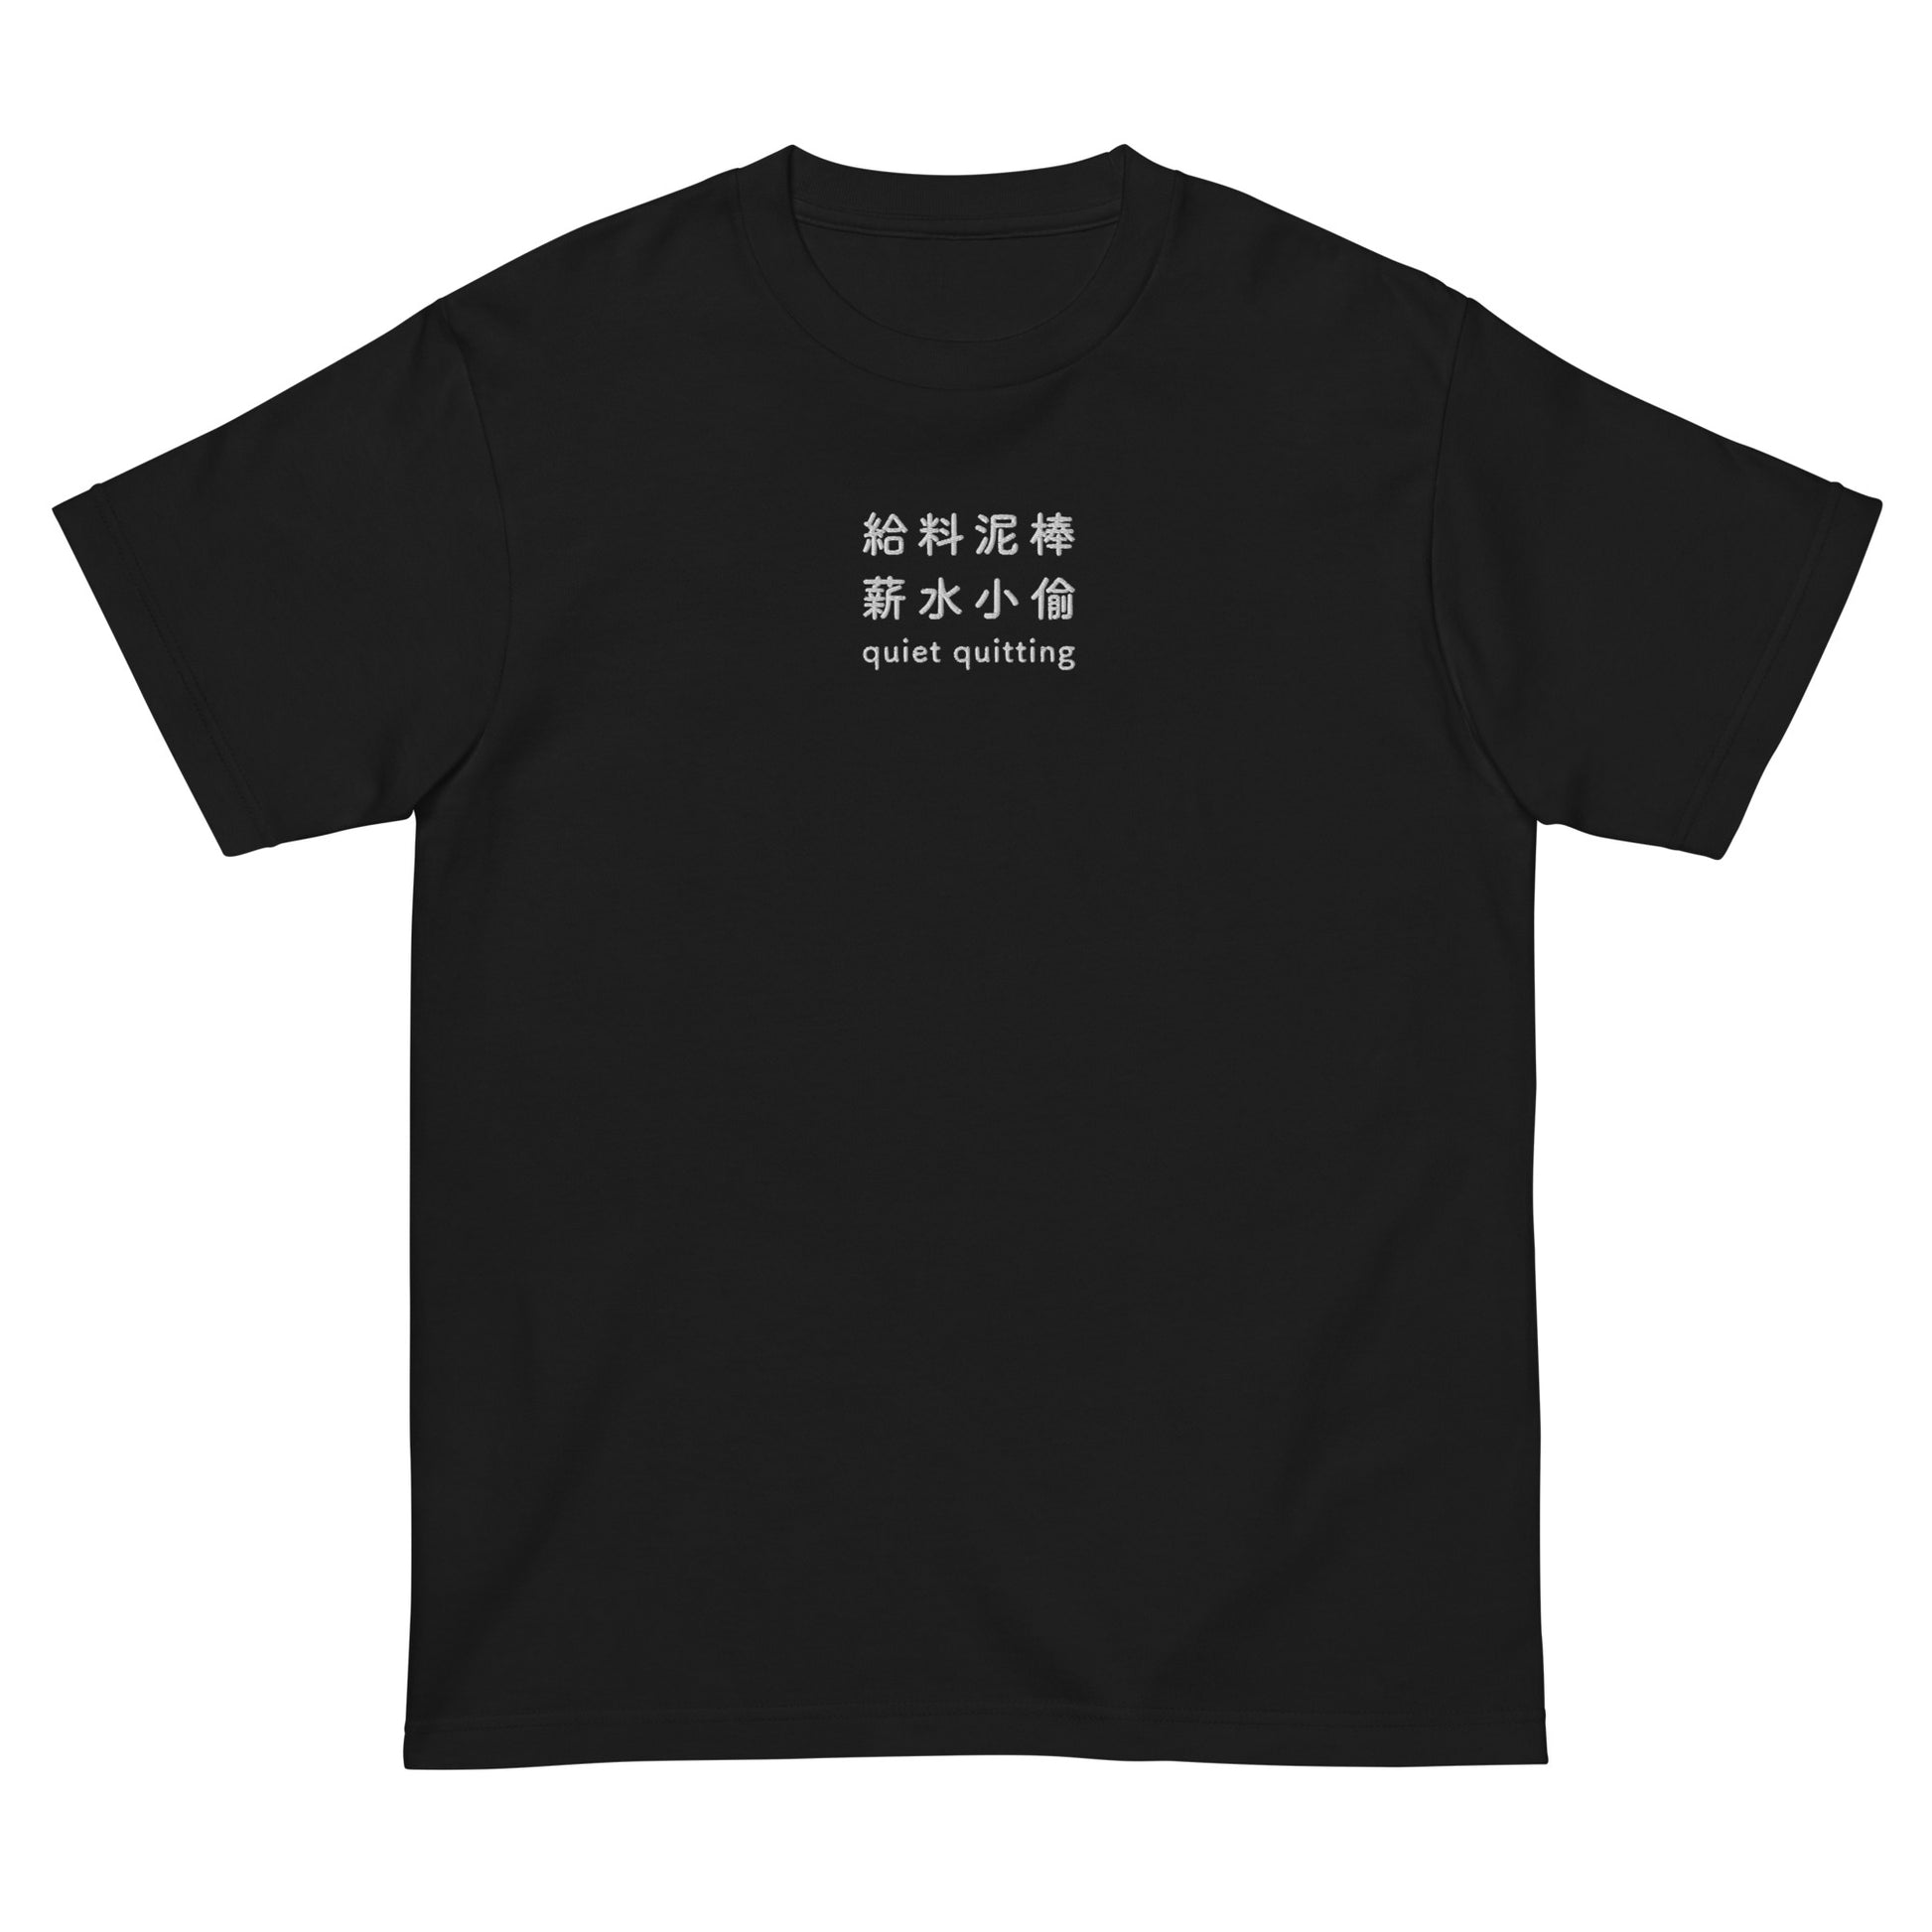 Black High Quality Tee - Front Design with an White Embroidery "Quiet Quitting" in Japanese,Chinese and English